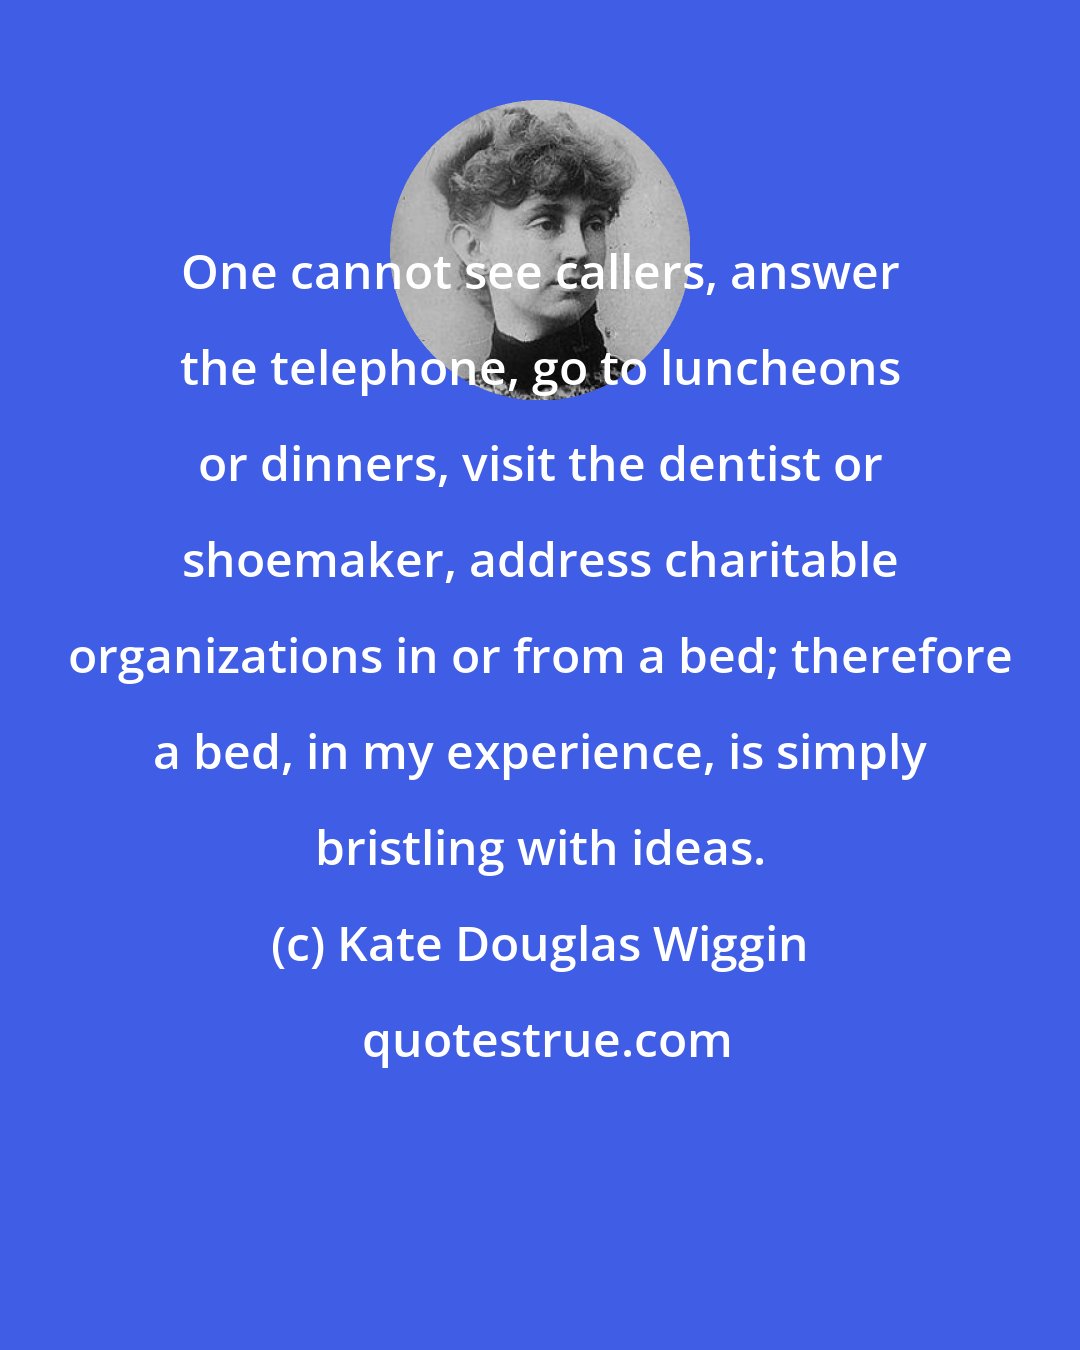 Kate Douglas Wiggin: One cannot see callers, answer the telephone, go to luncheons or dinners, visit the dentist or shoemaker, address charitable organizations in or from a bed; therefore a bed, in my experience, is simply bristling with ideas.